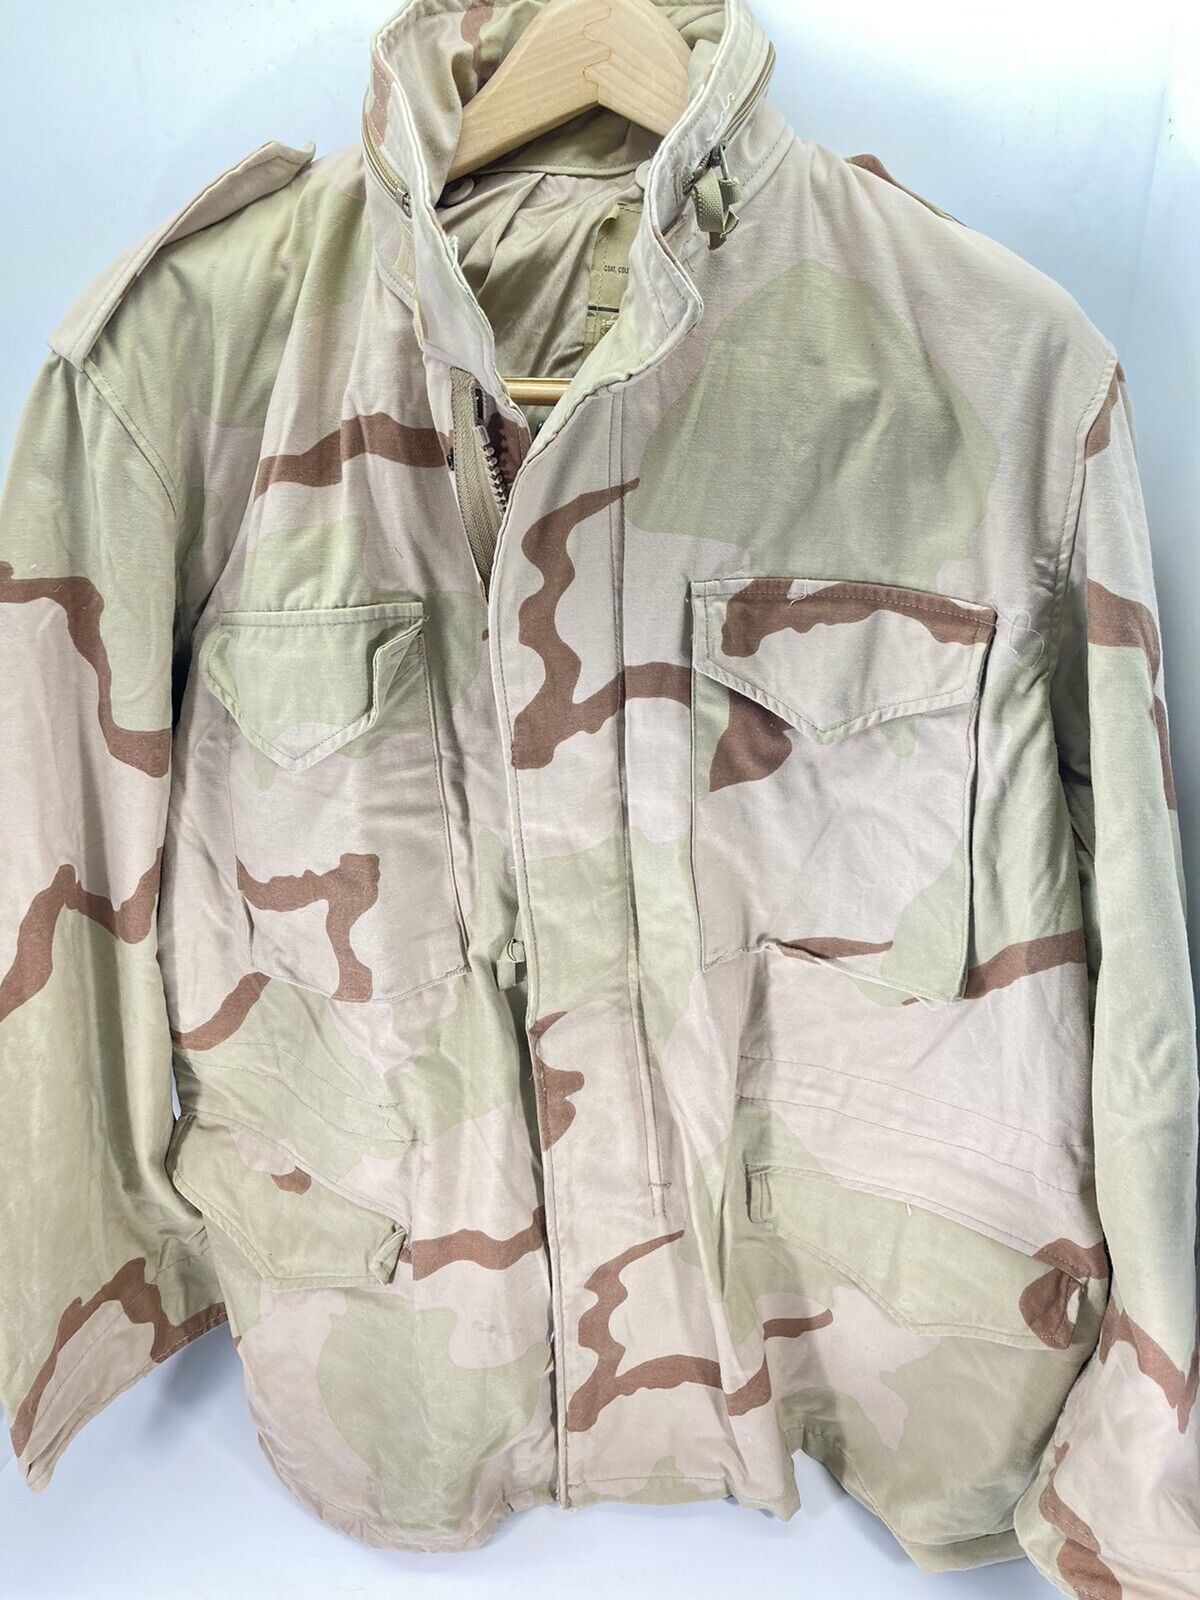 US Military M65 Field Jacket Desert DCU Camouflage Large Regular Army ...